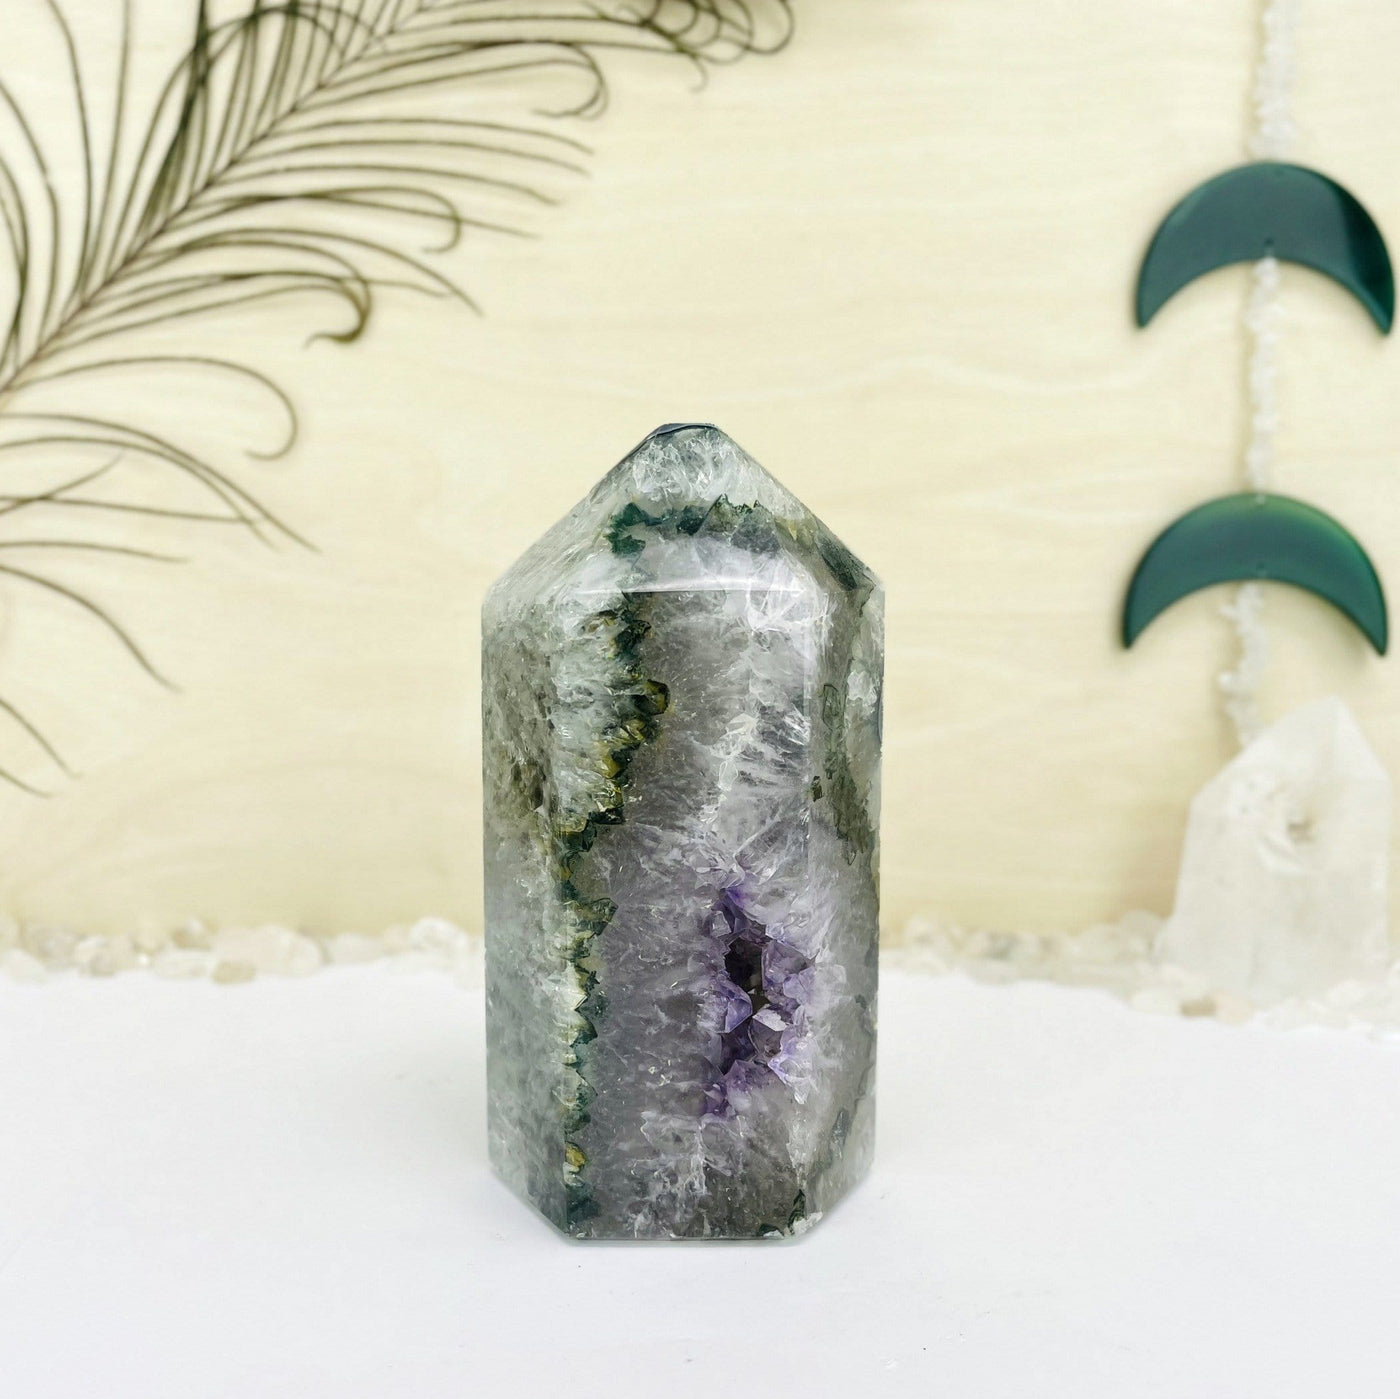 agate and amethyst polished tower. It is mostly white with green banding and a purple druzy cluster opening at the bottom.